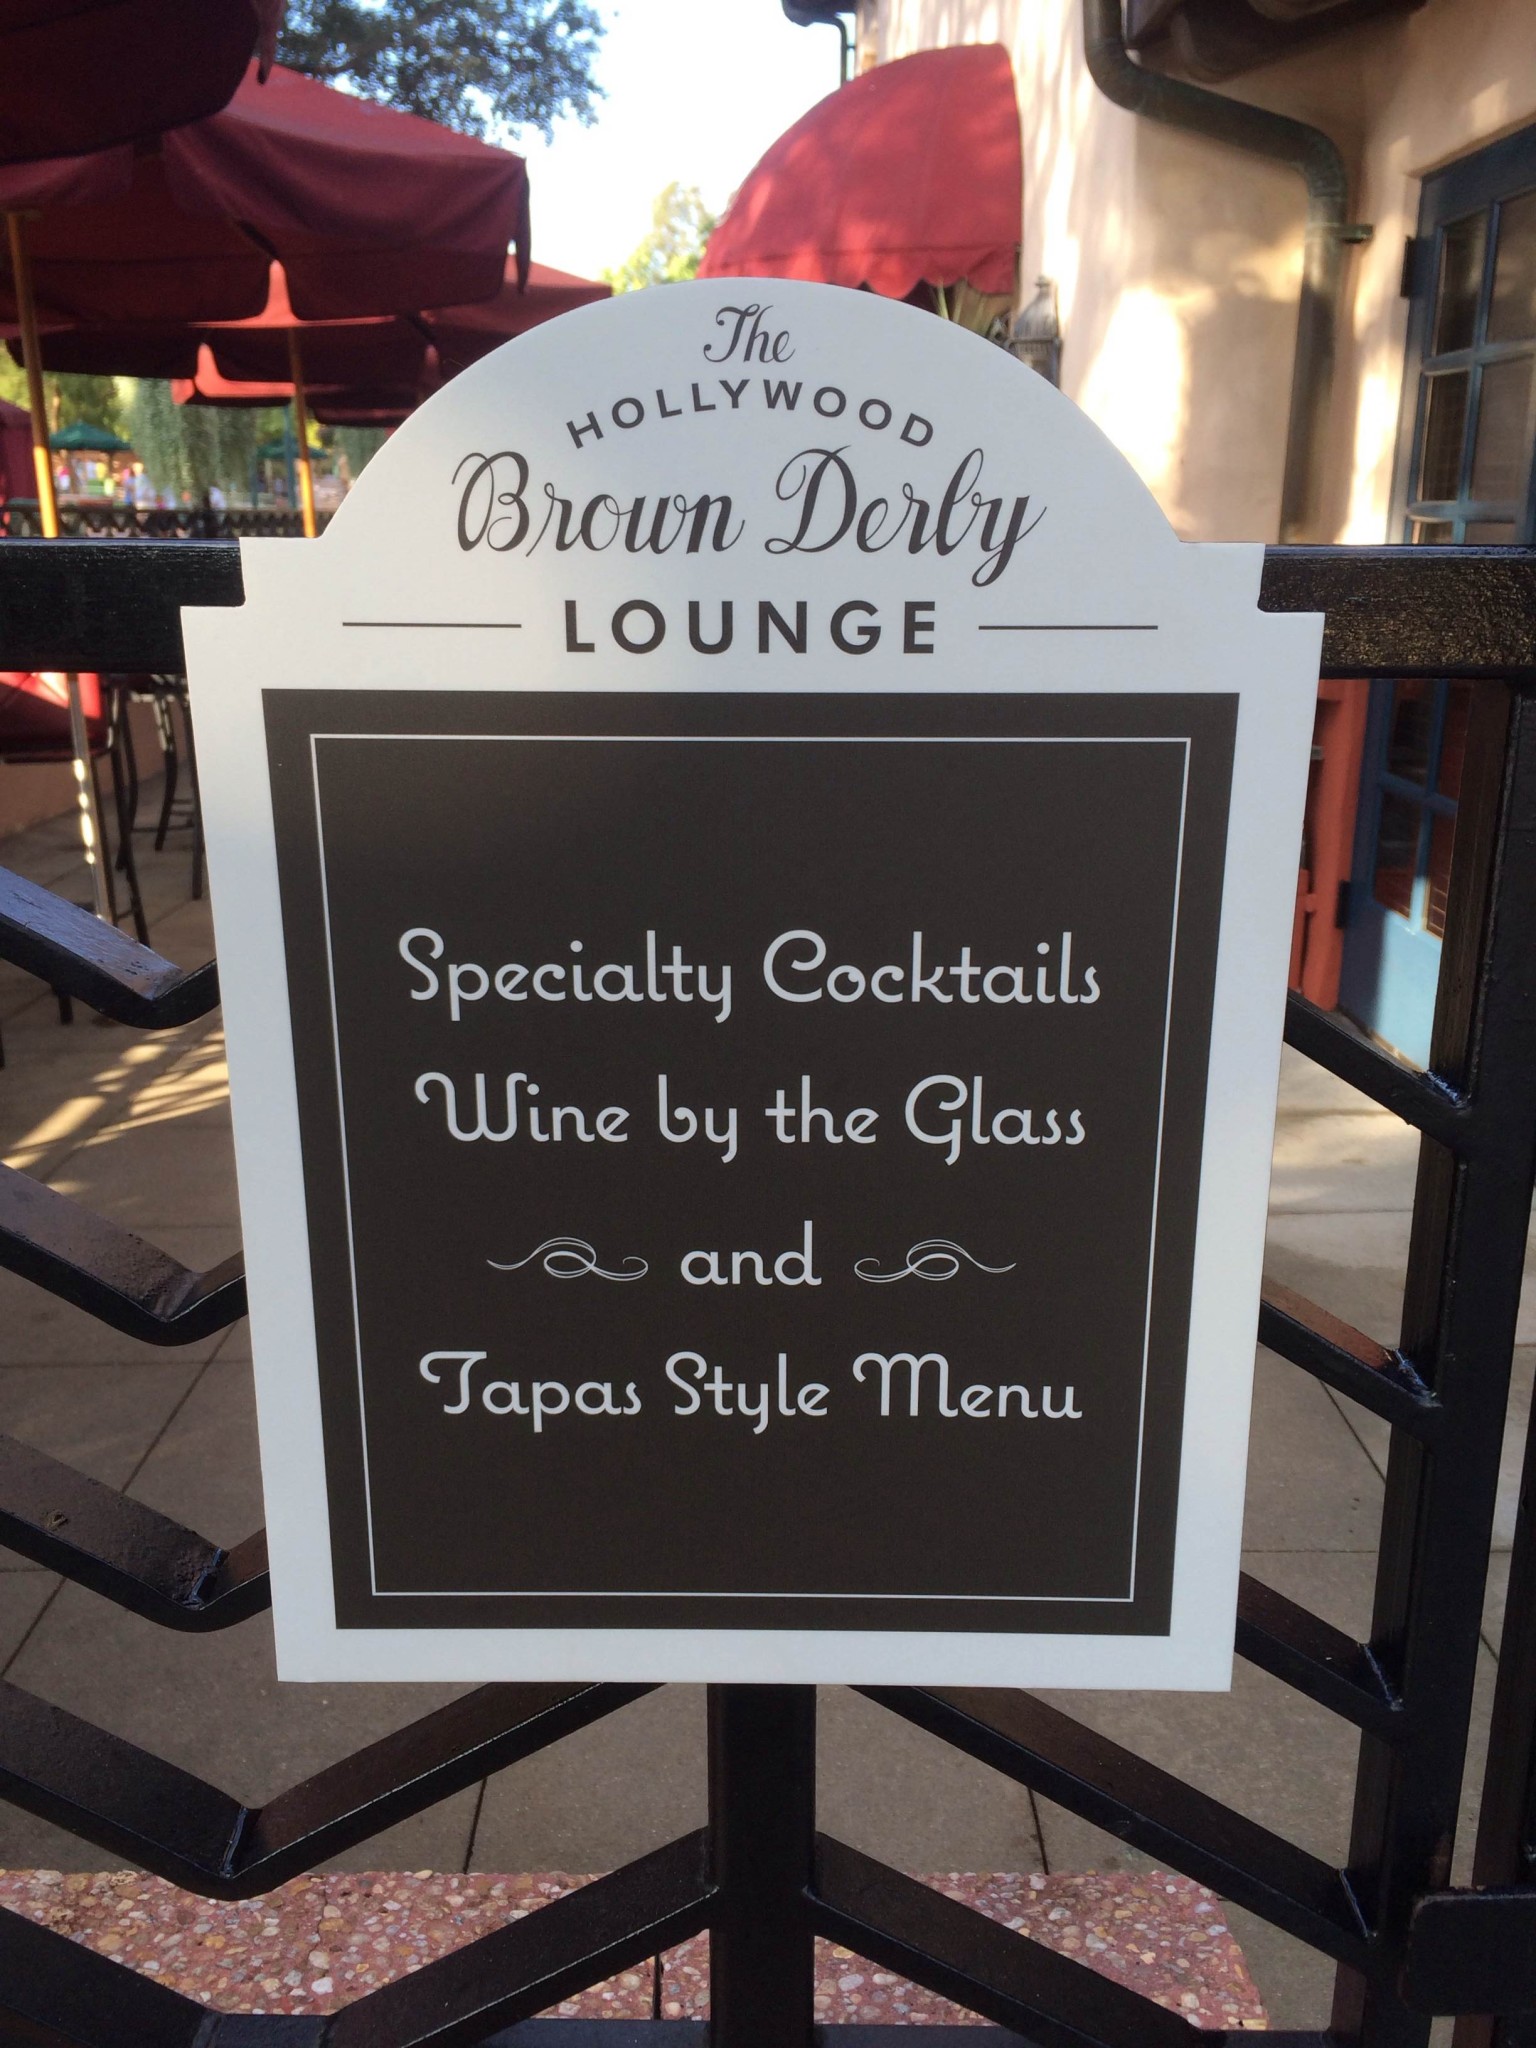 Brown Derby Lounge Officially Opened at Disney’s Hollywood Studios!